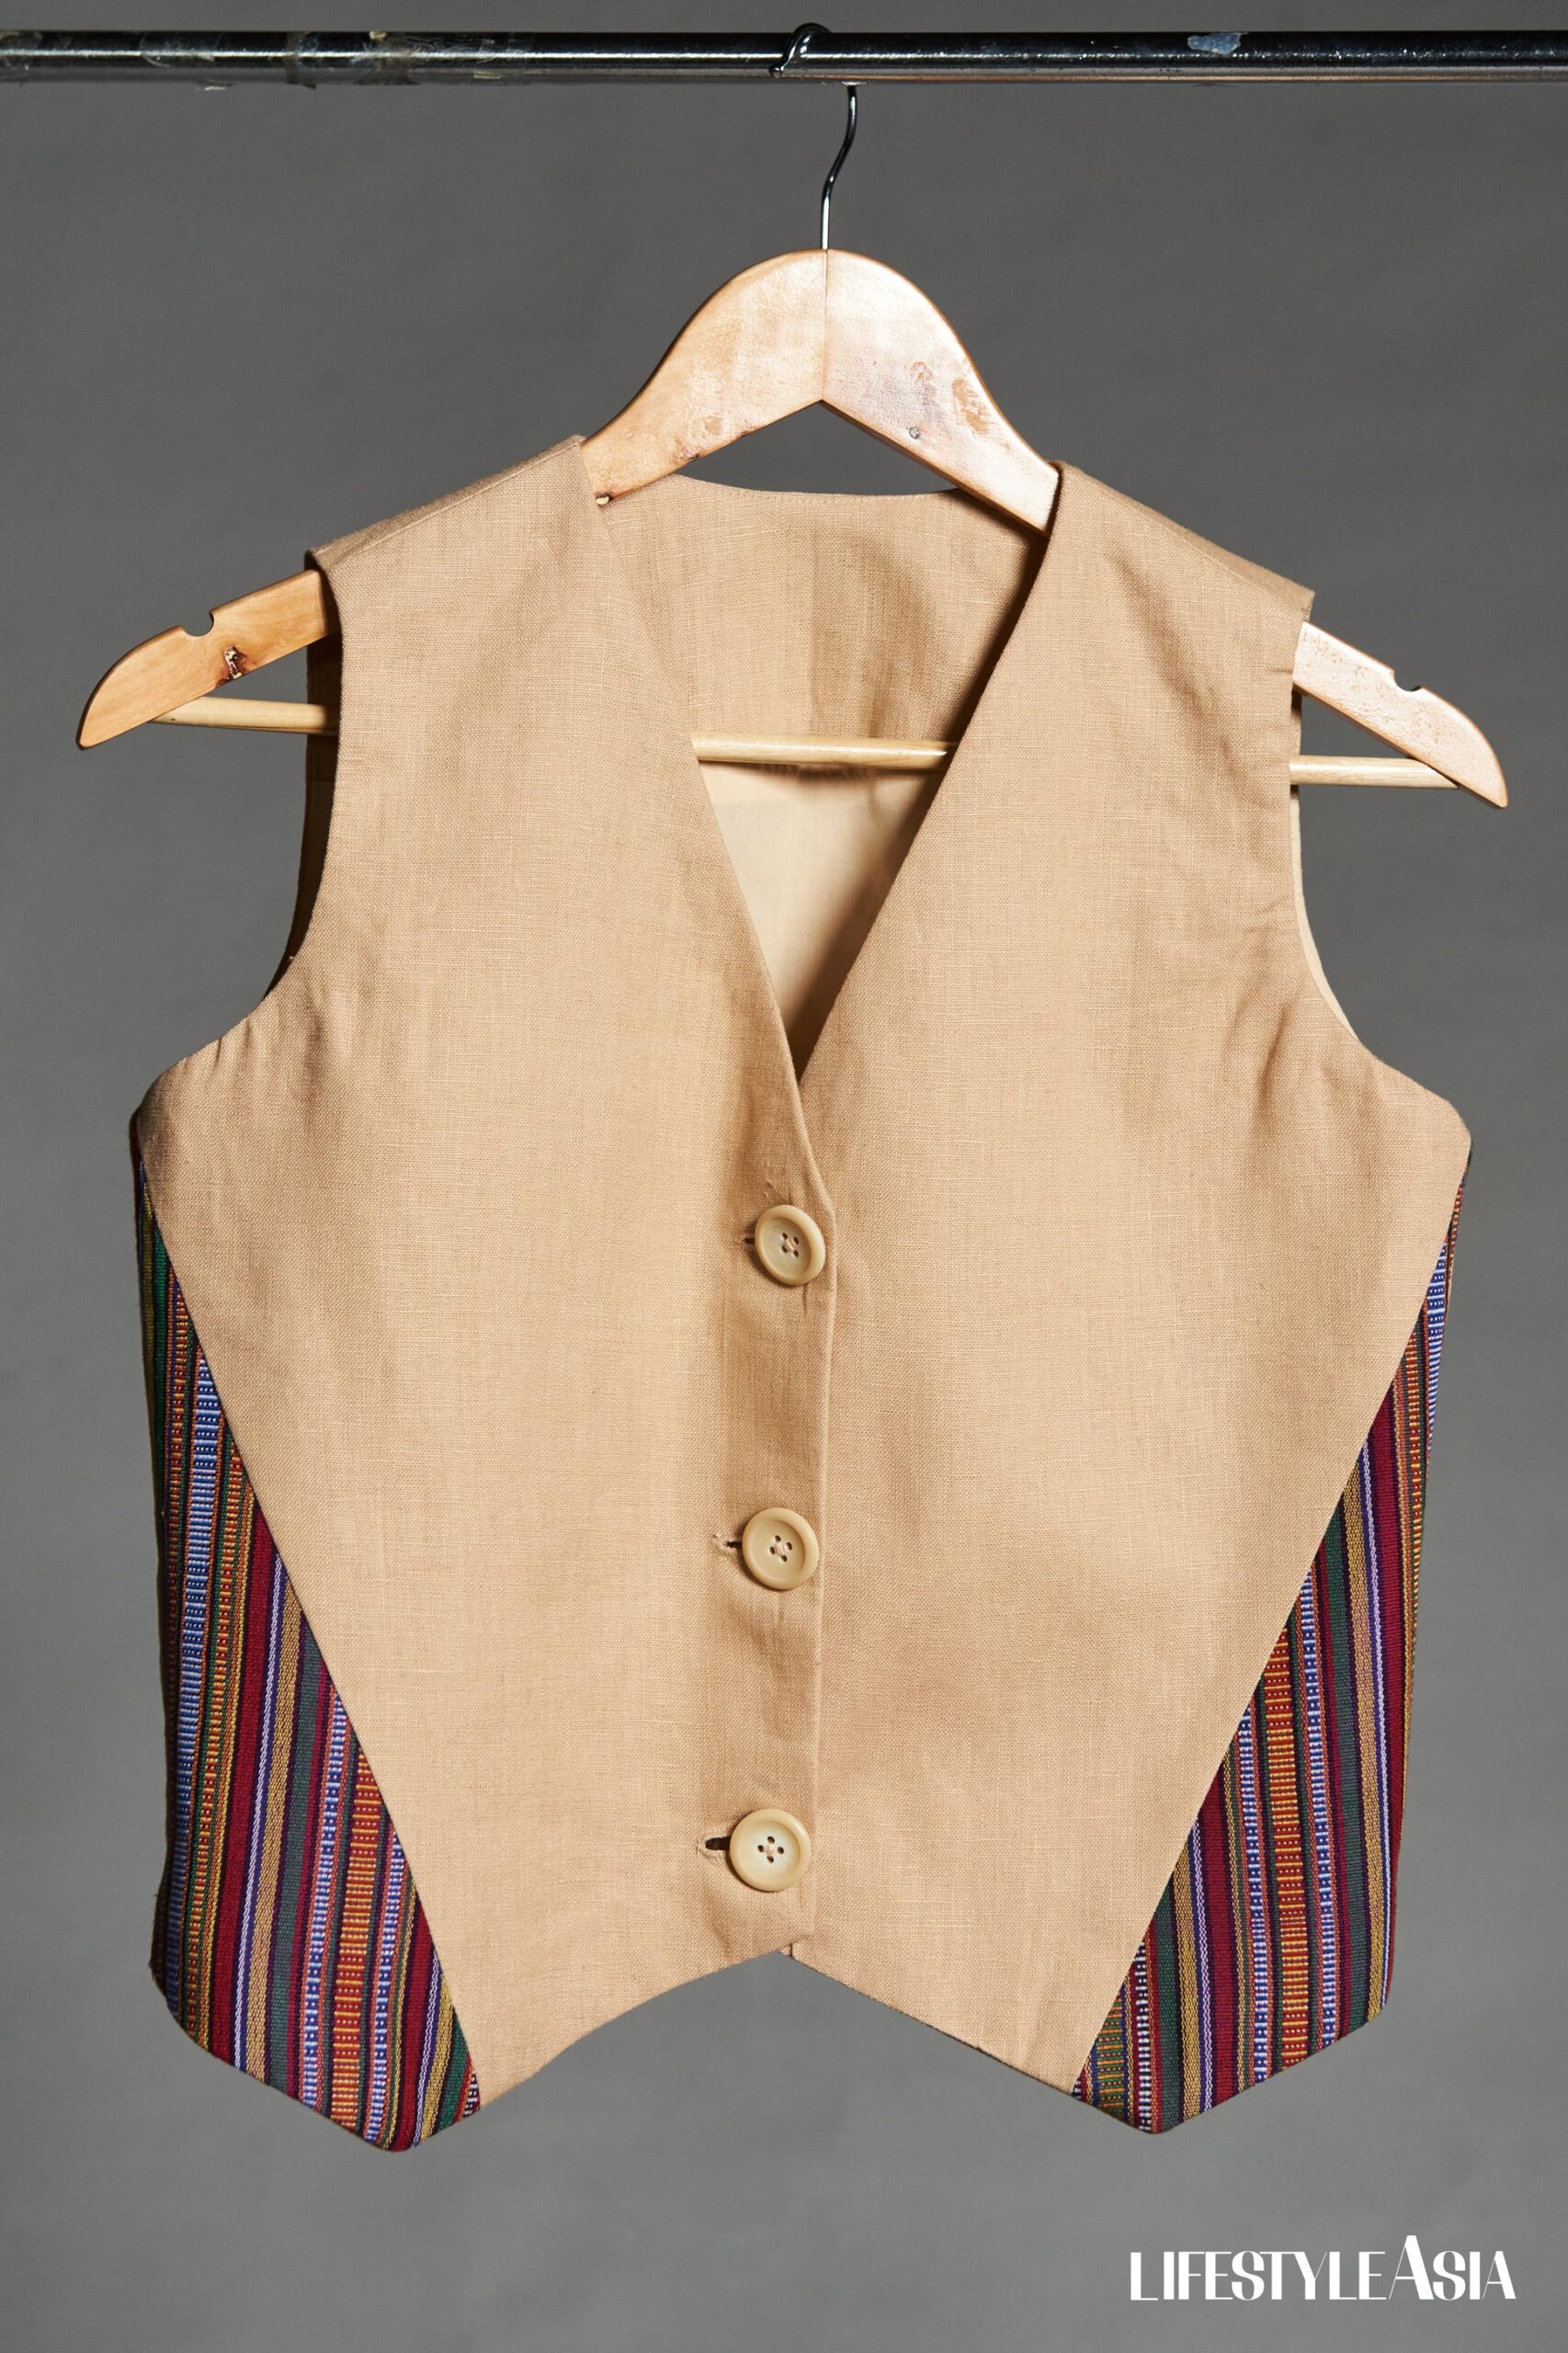 A vest from Kathâ Pilipinas